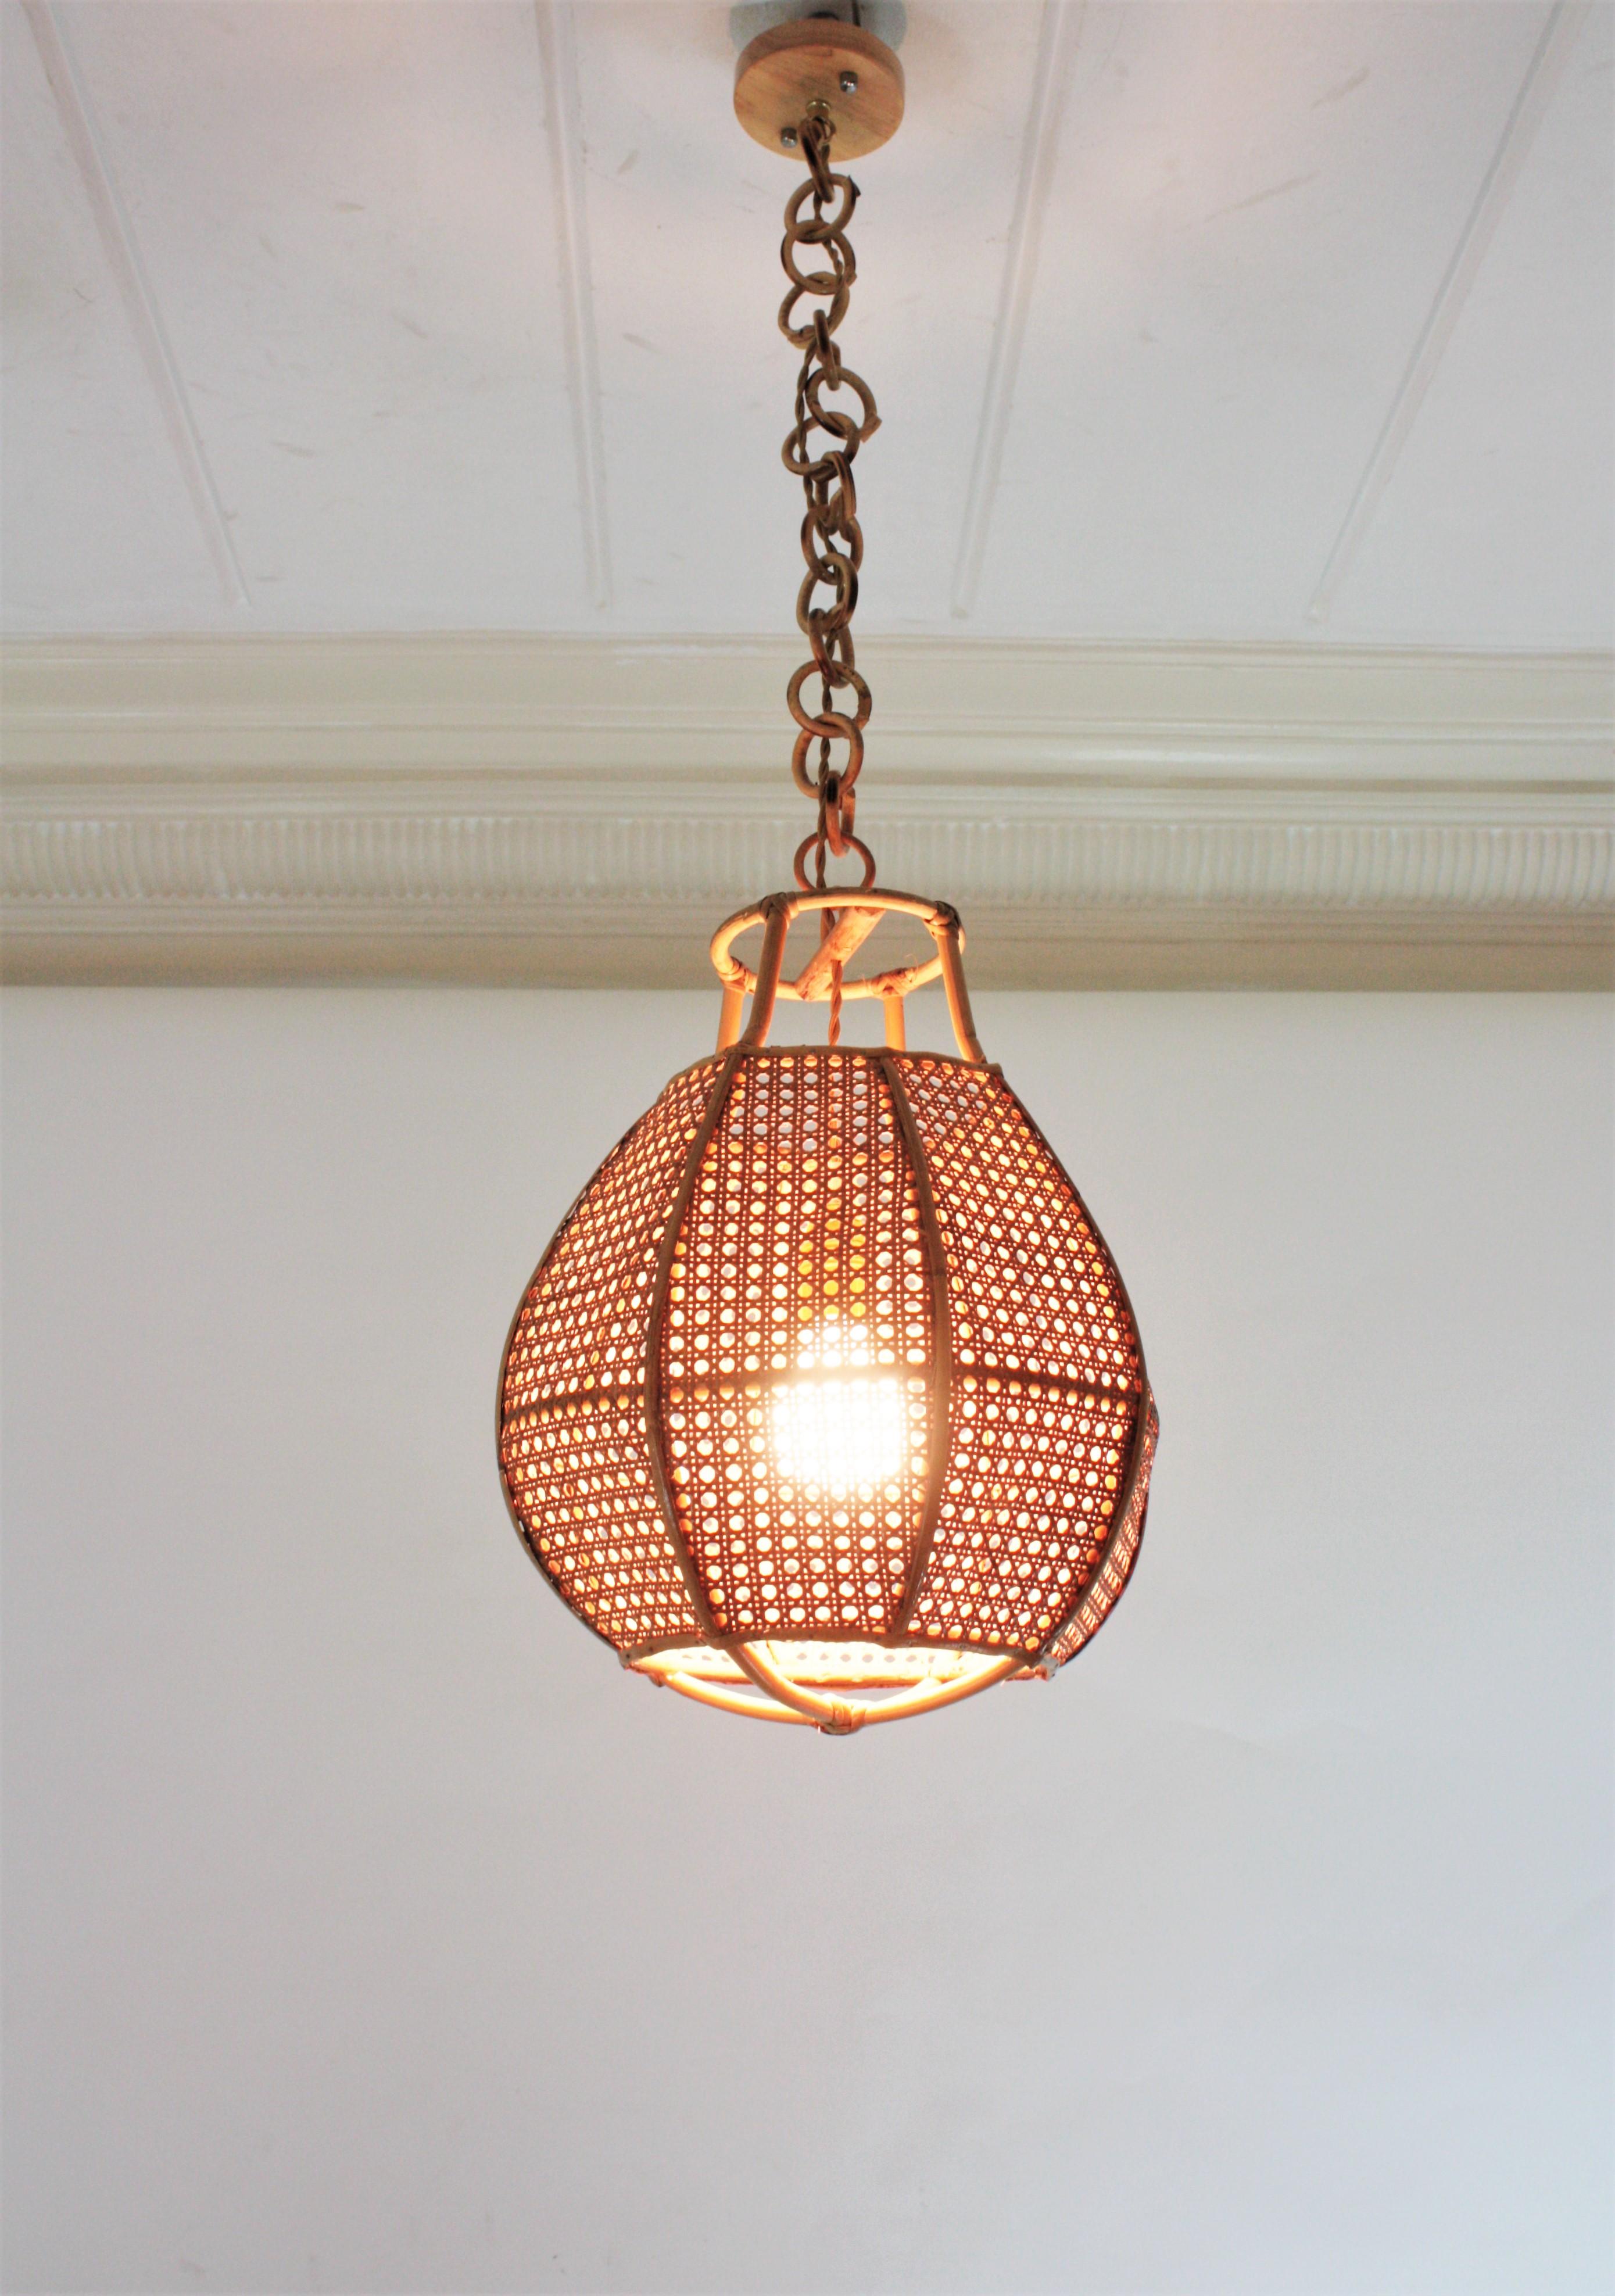 Hand-Crafted Italian Modernist Wicker Wire Rattan Globe Pendant Hanging Light For Sale